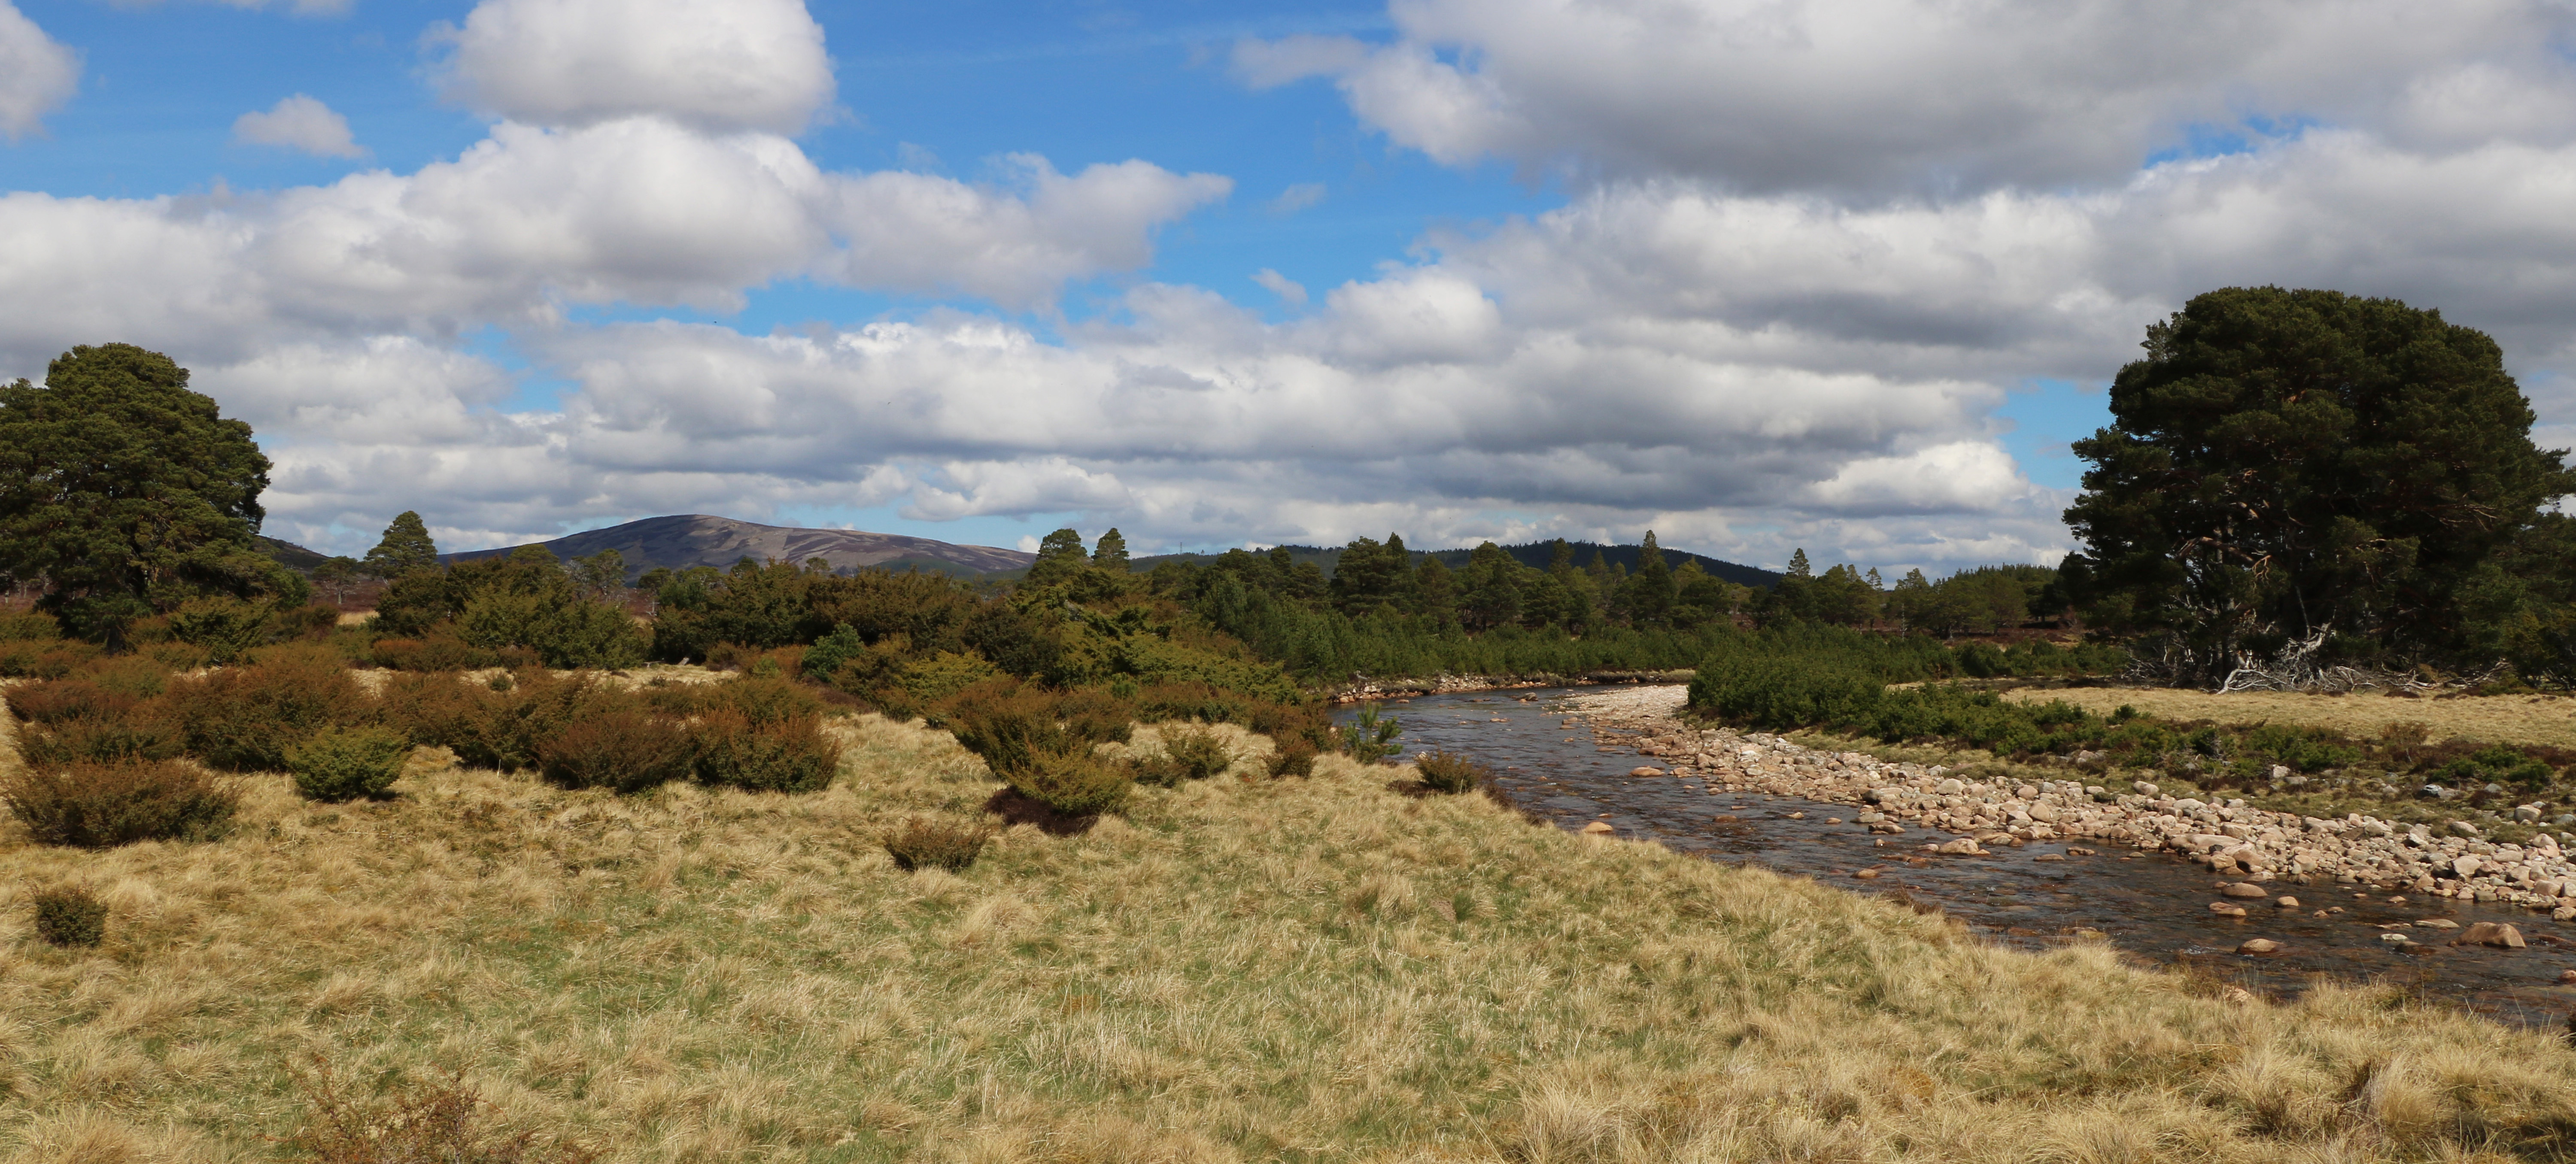 River running through Scottish forest with sunny cloud filled sky